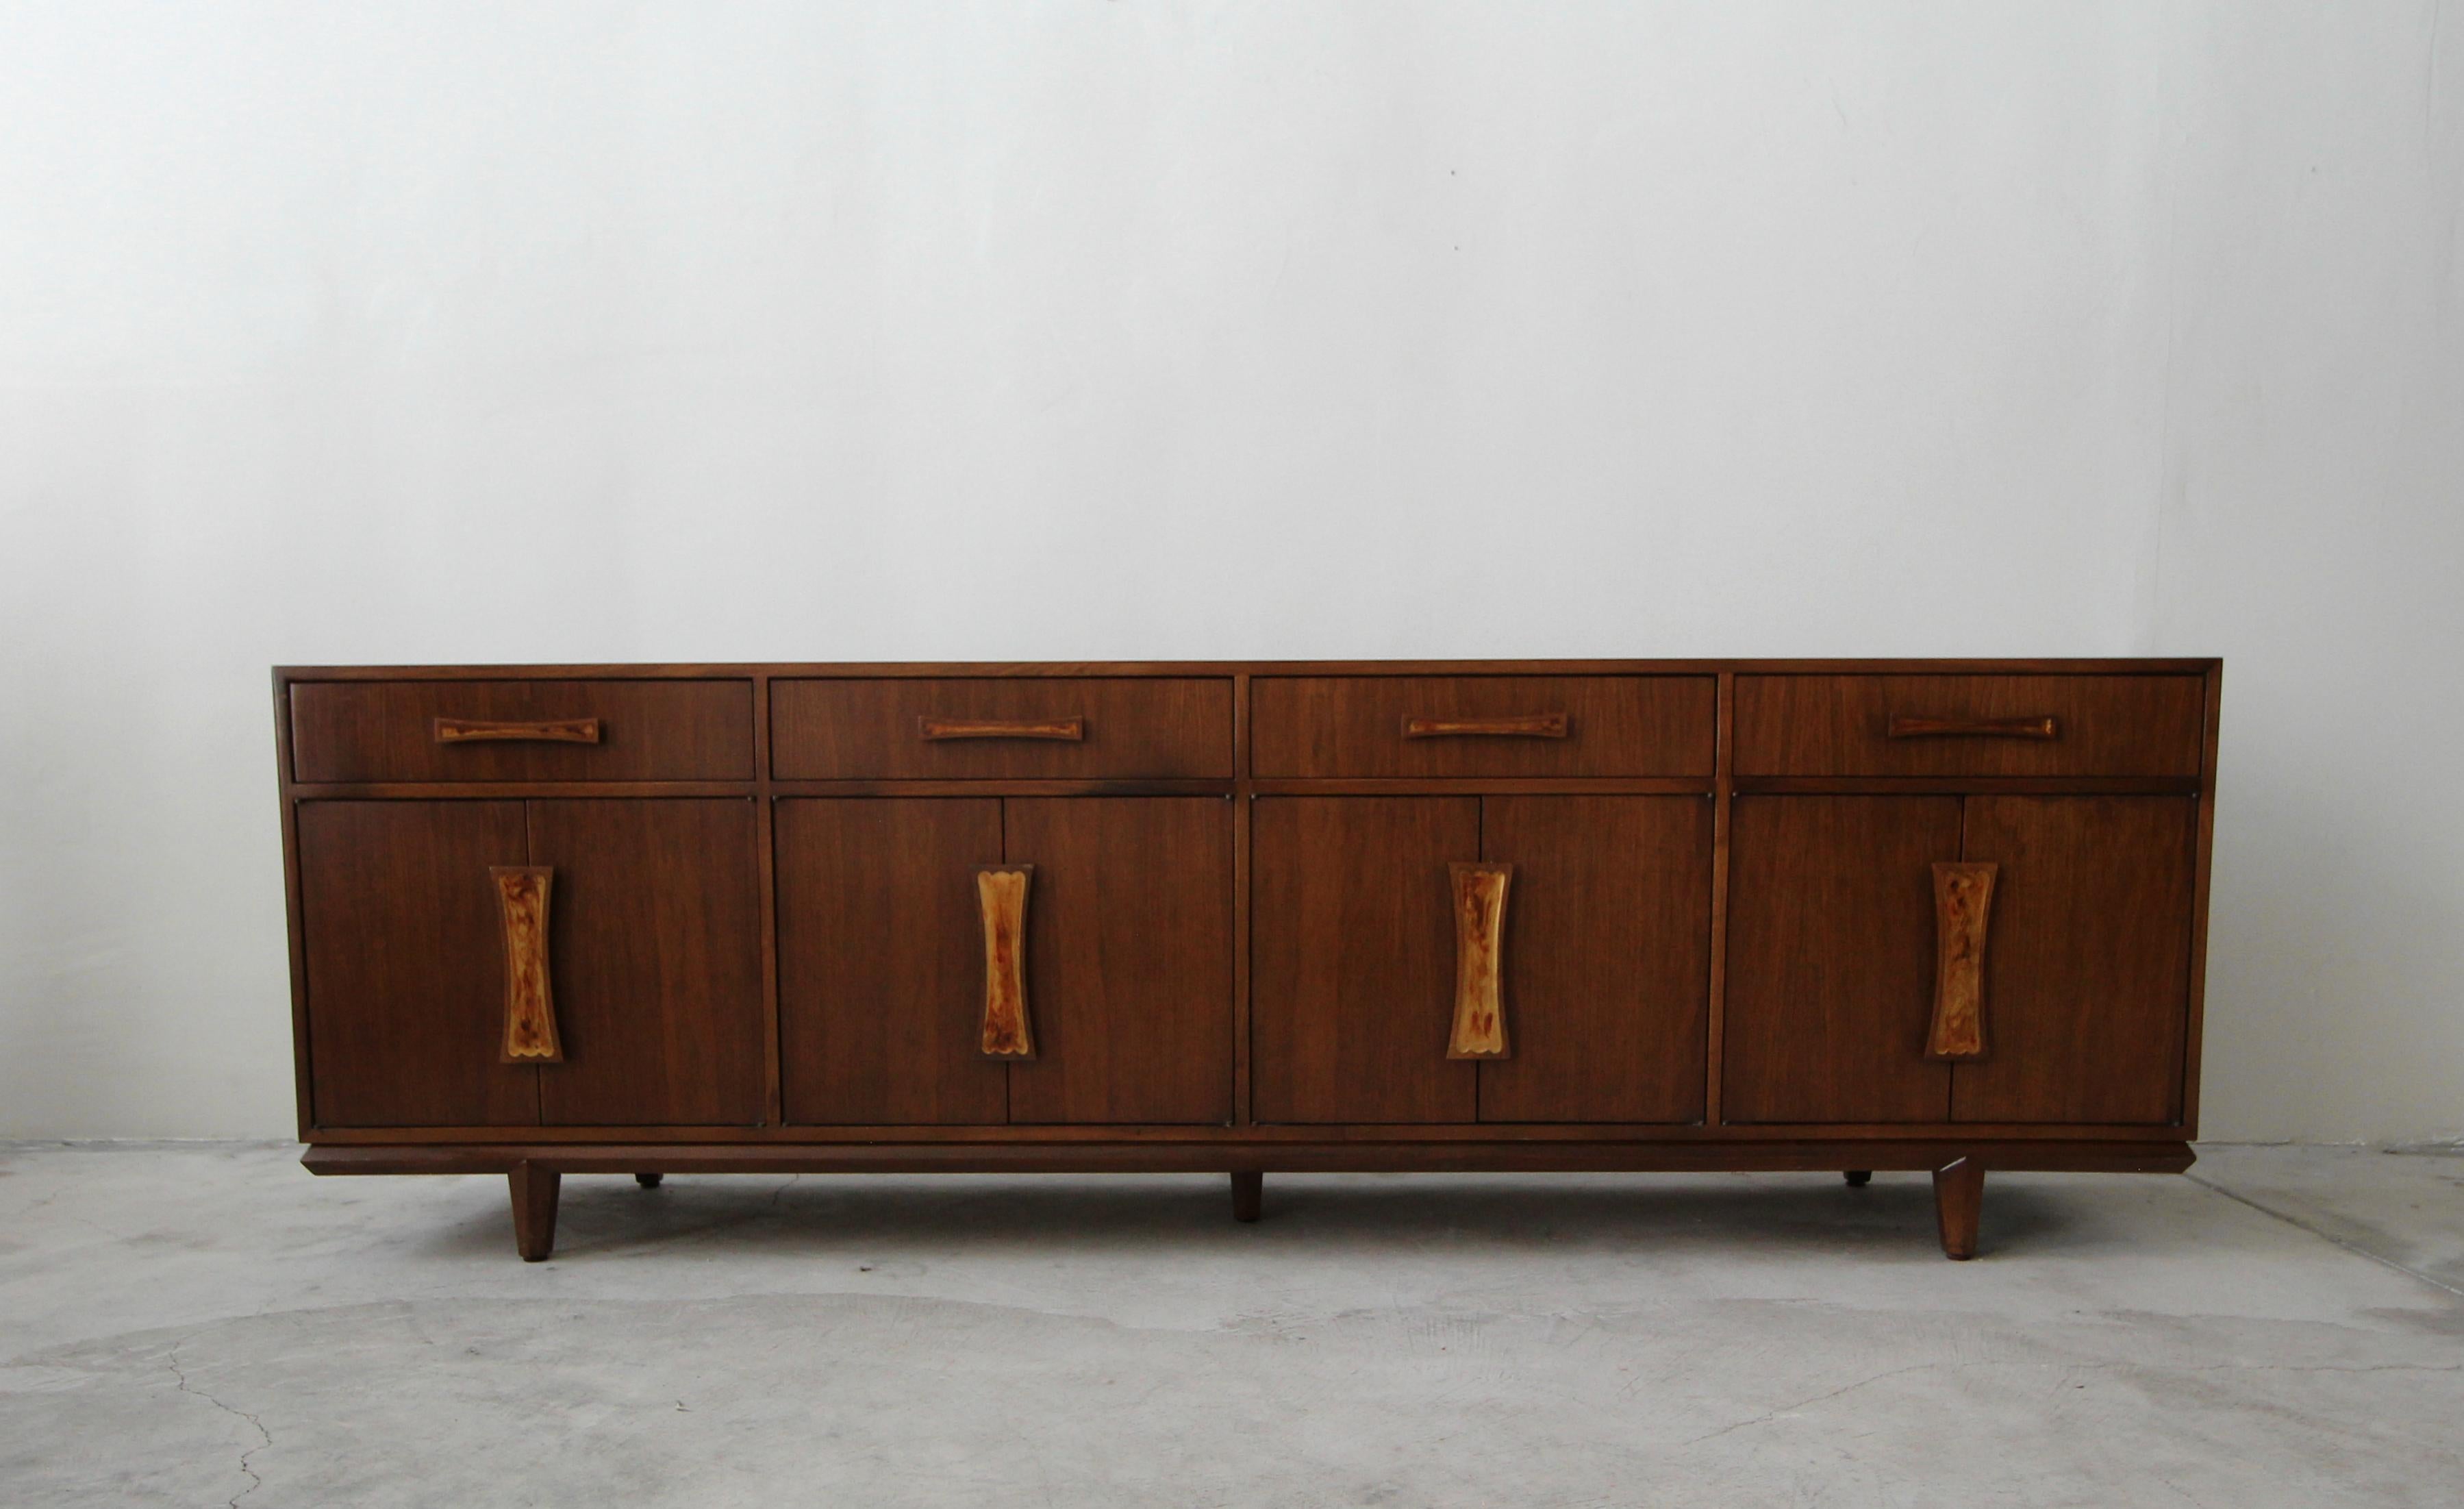 Exquisite midcentury walnut credenza by Cal Mode Furniture. If you’re looking for a large case piece with a simple and beautiful look, you've found it. The unique resin inlay handles and sculpted details, give this piece stunning